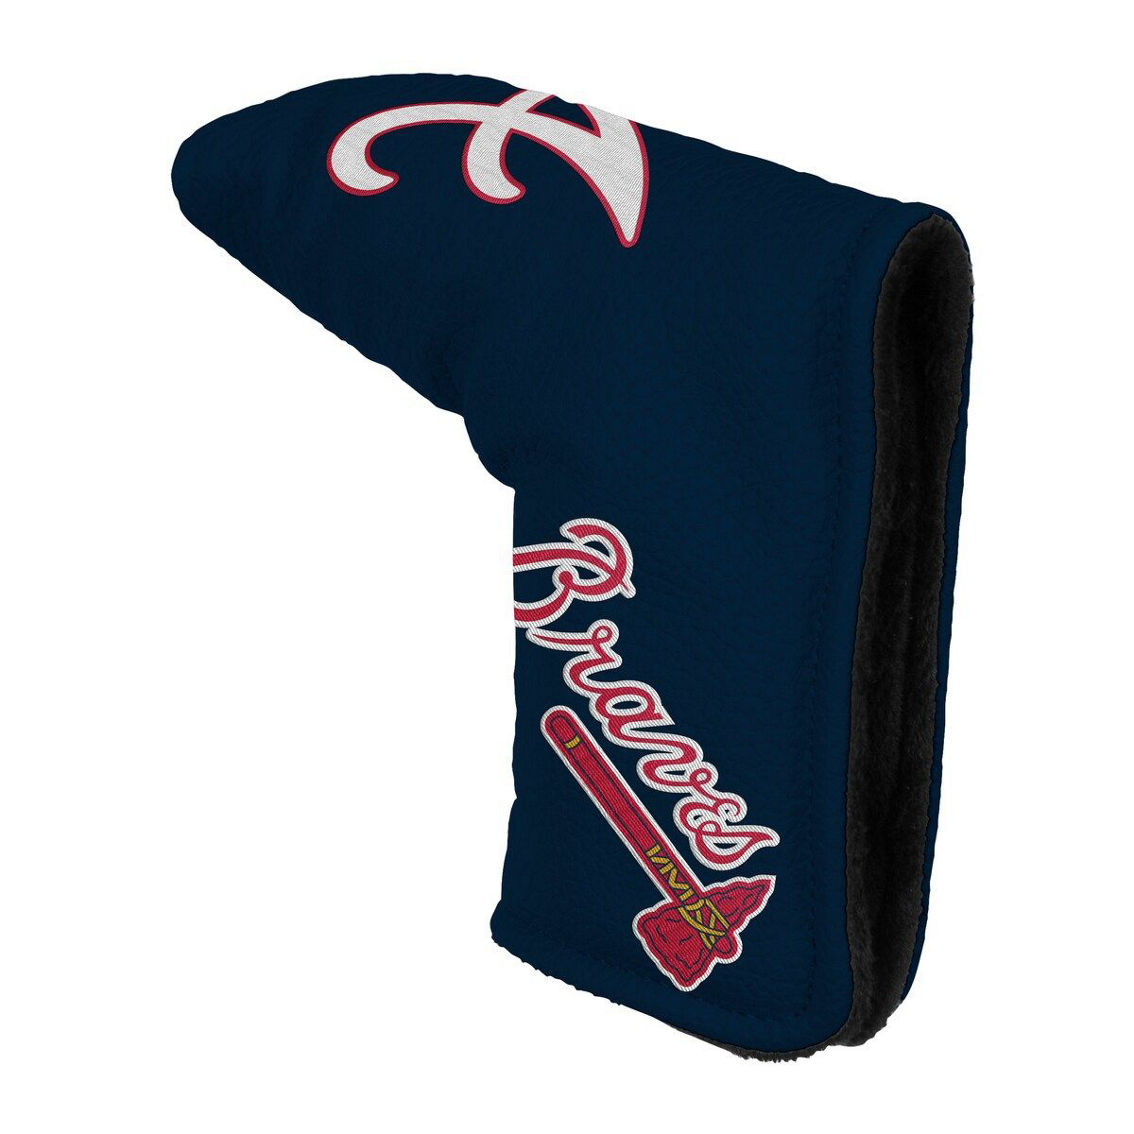 WinCraft Atlanta Braves Blade Putter Cover - Image 2 of 3